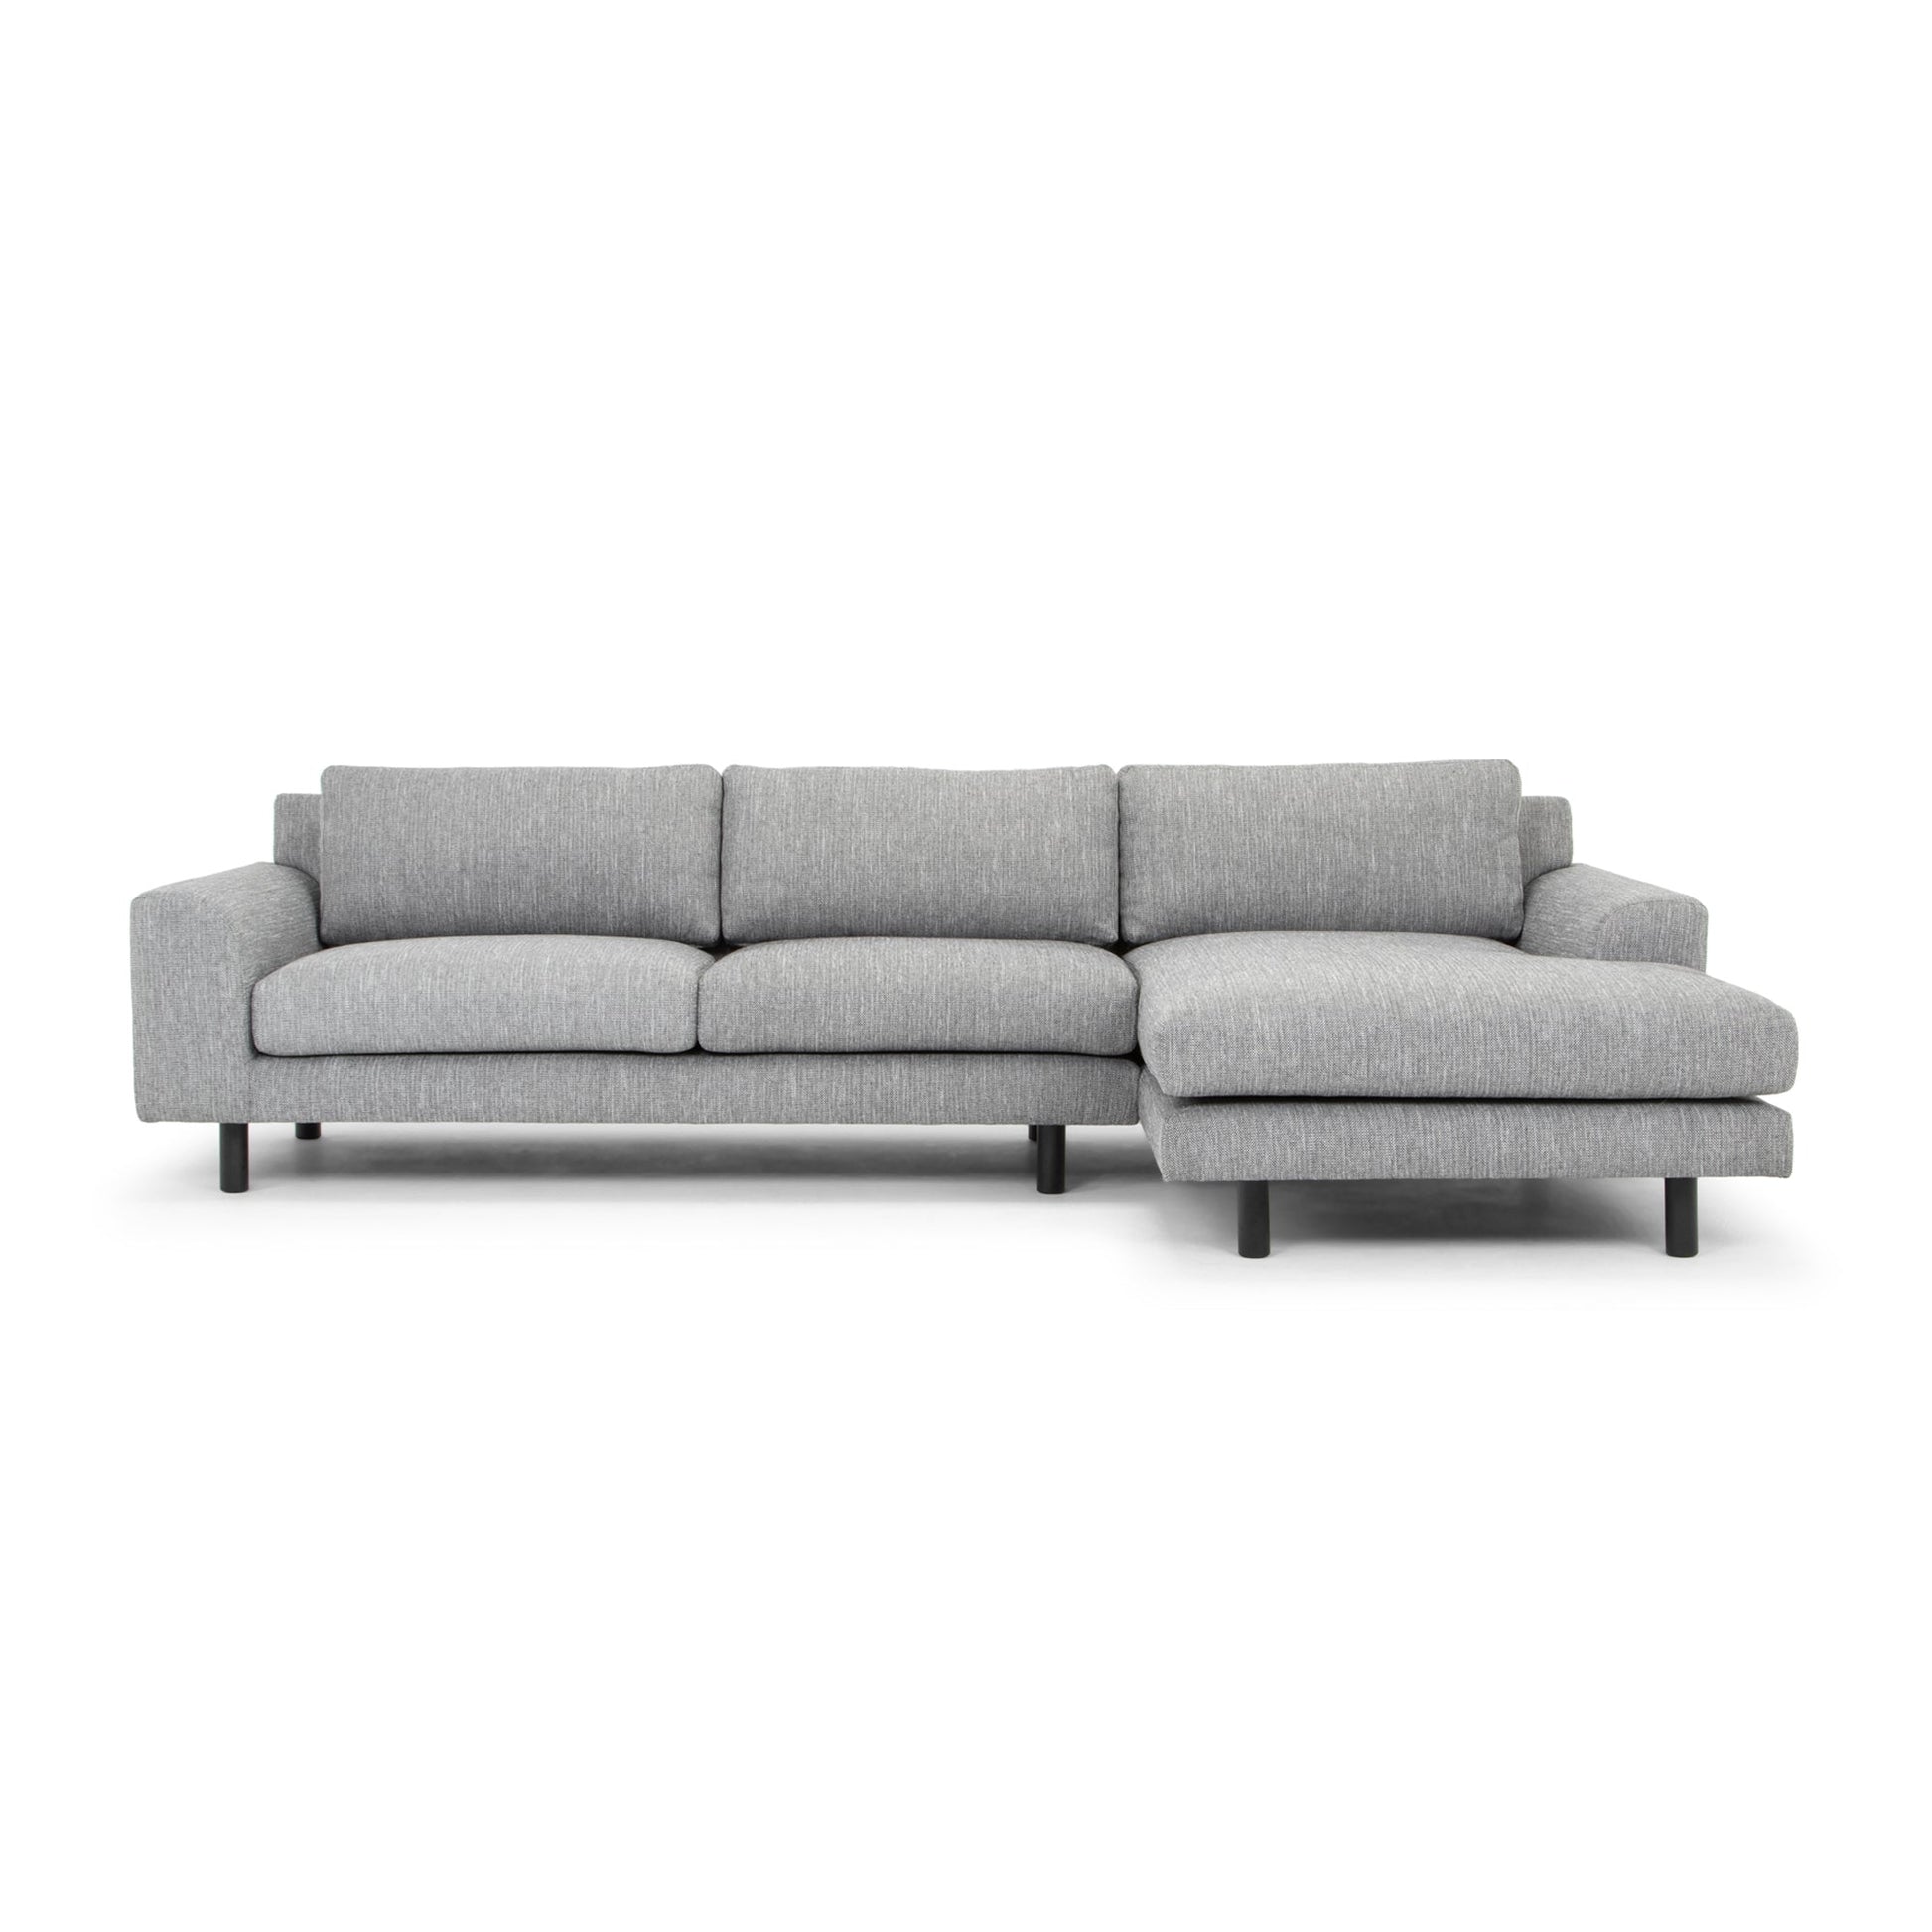 Jacob 3 Seater Left Chaise Sofa - Graphite Grey with Black Legs-2